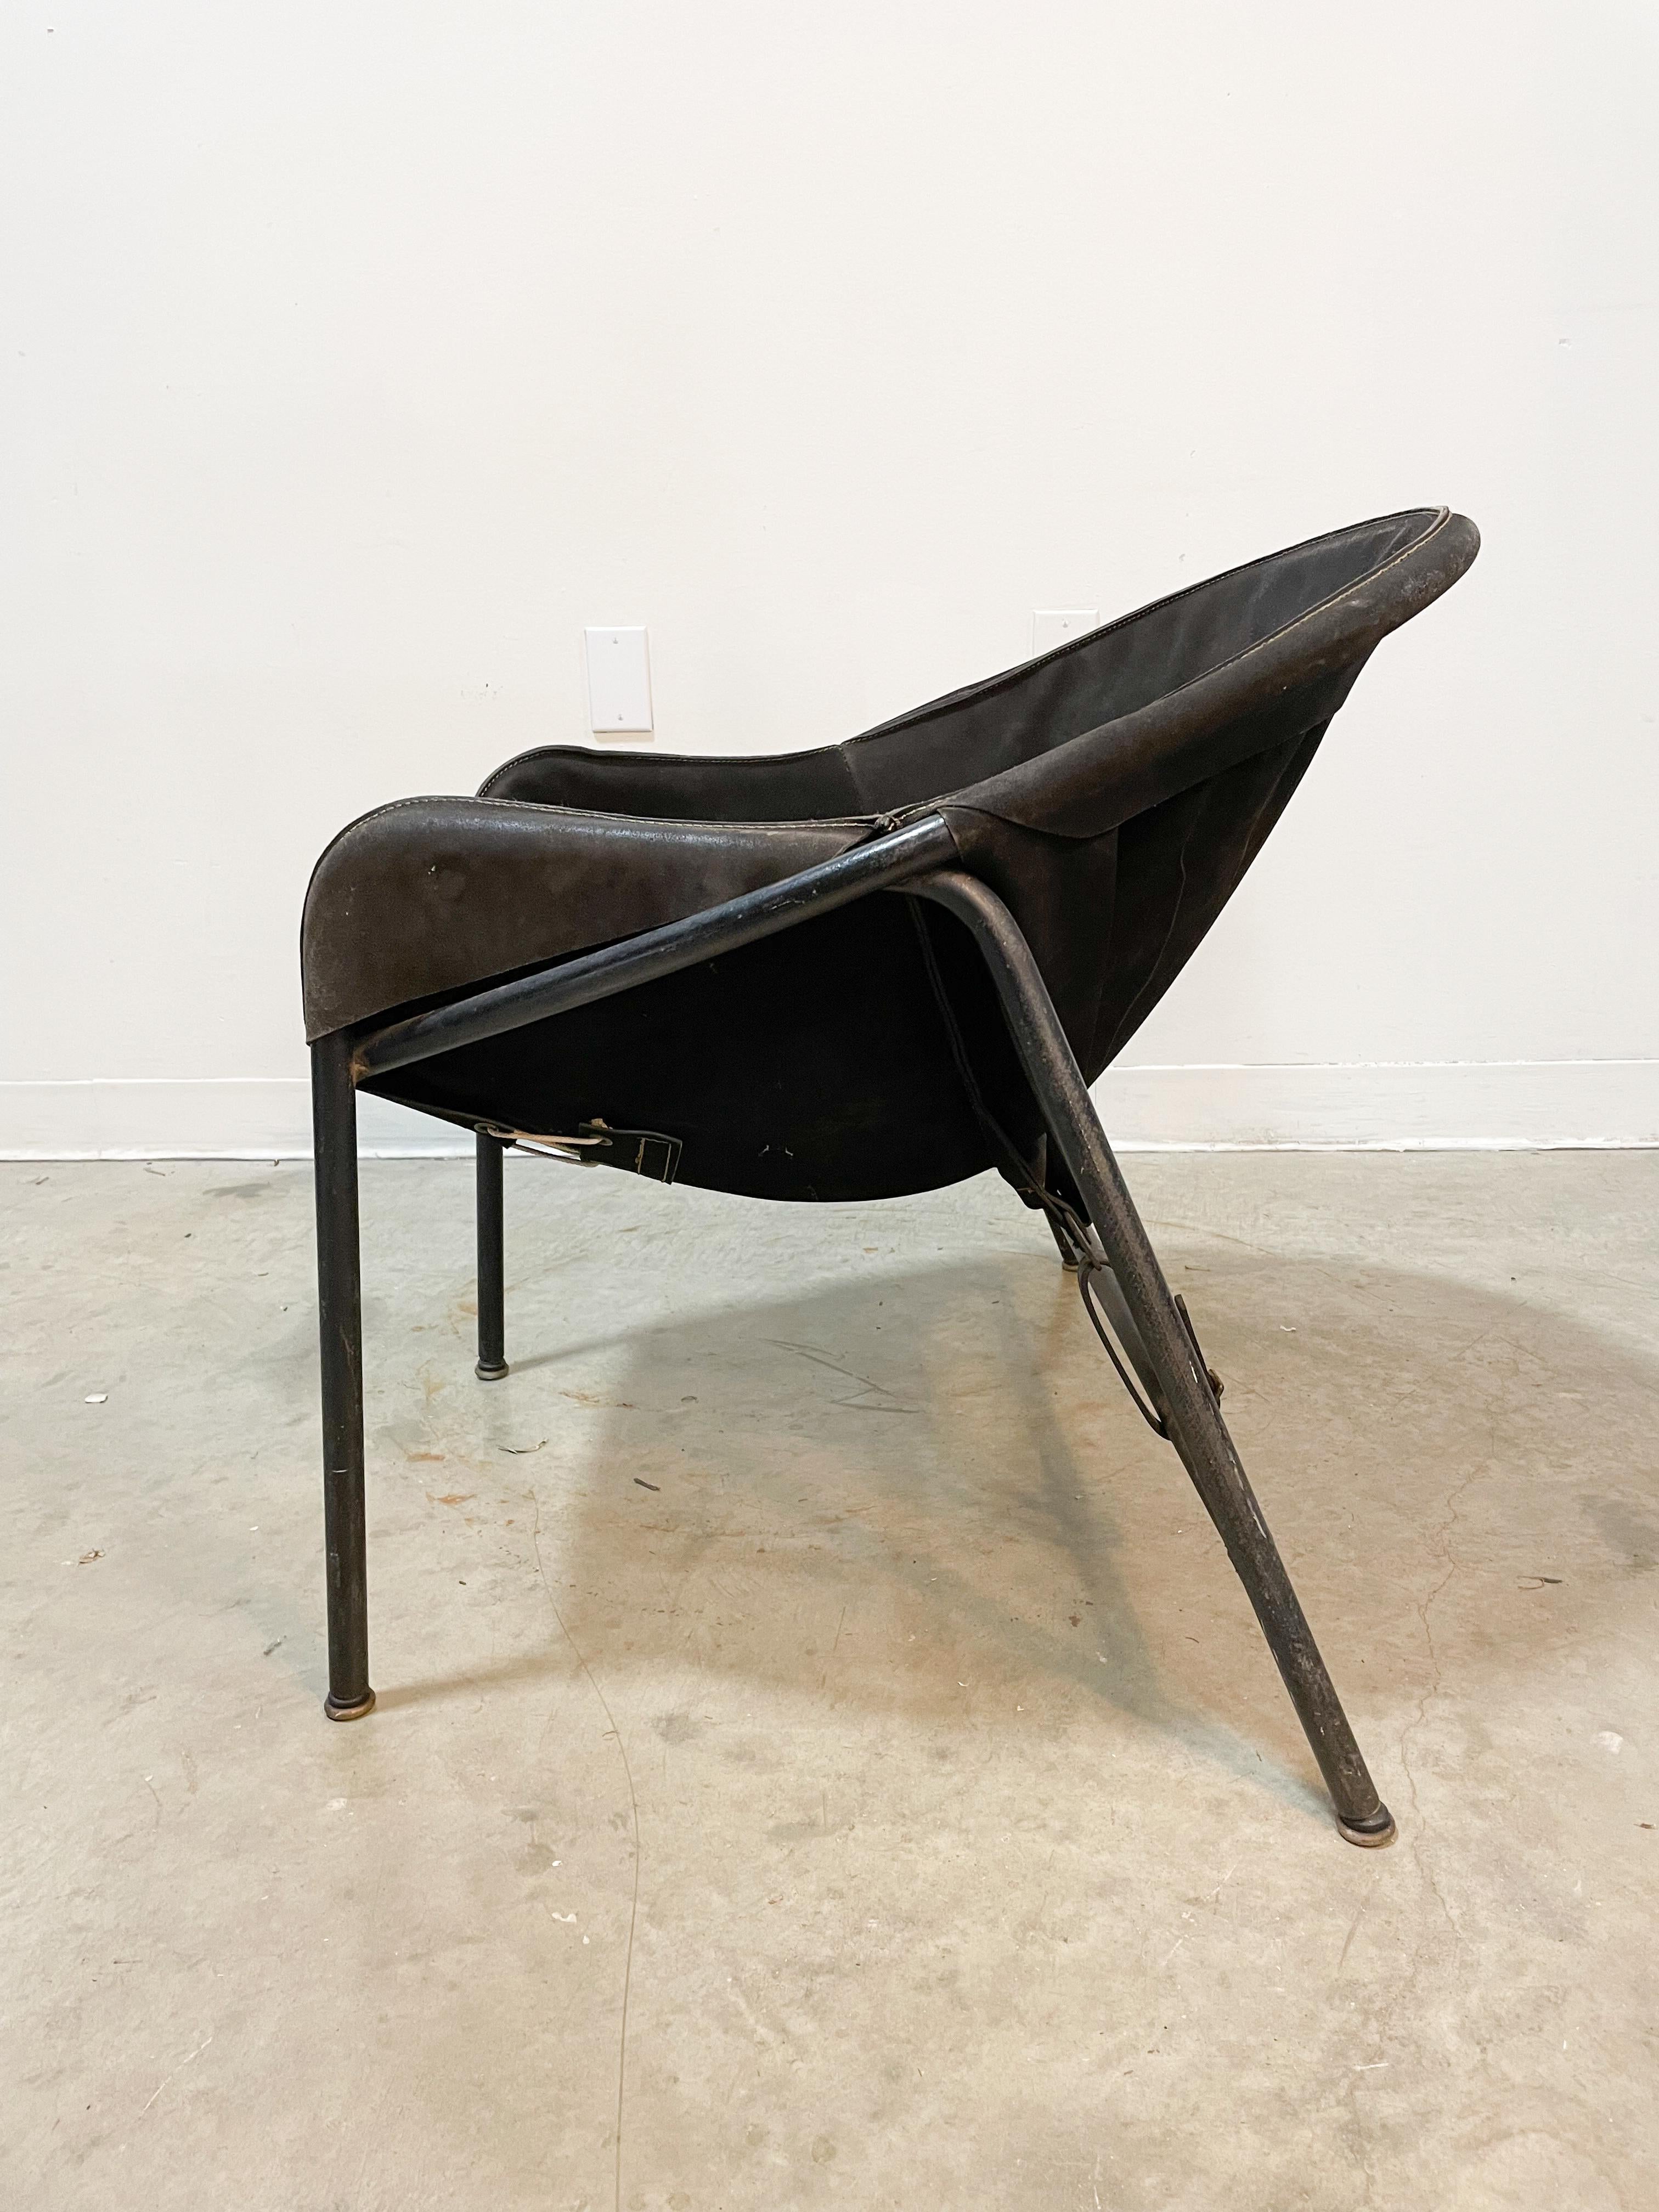 Early 1960s metal and suede hoop sling chair by designer Erik Ole Jorgensen made by Bovirke in Denmark. Deceptively comfortable, this sling lounge chair conforms to your body providing great support. All original black suede sling and leather straps